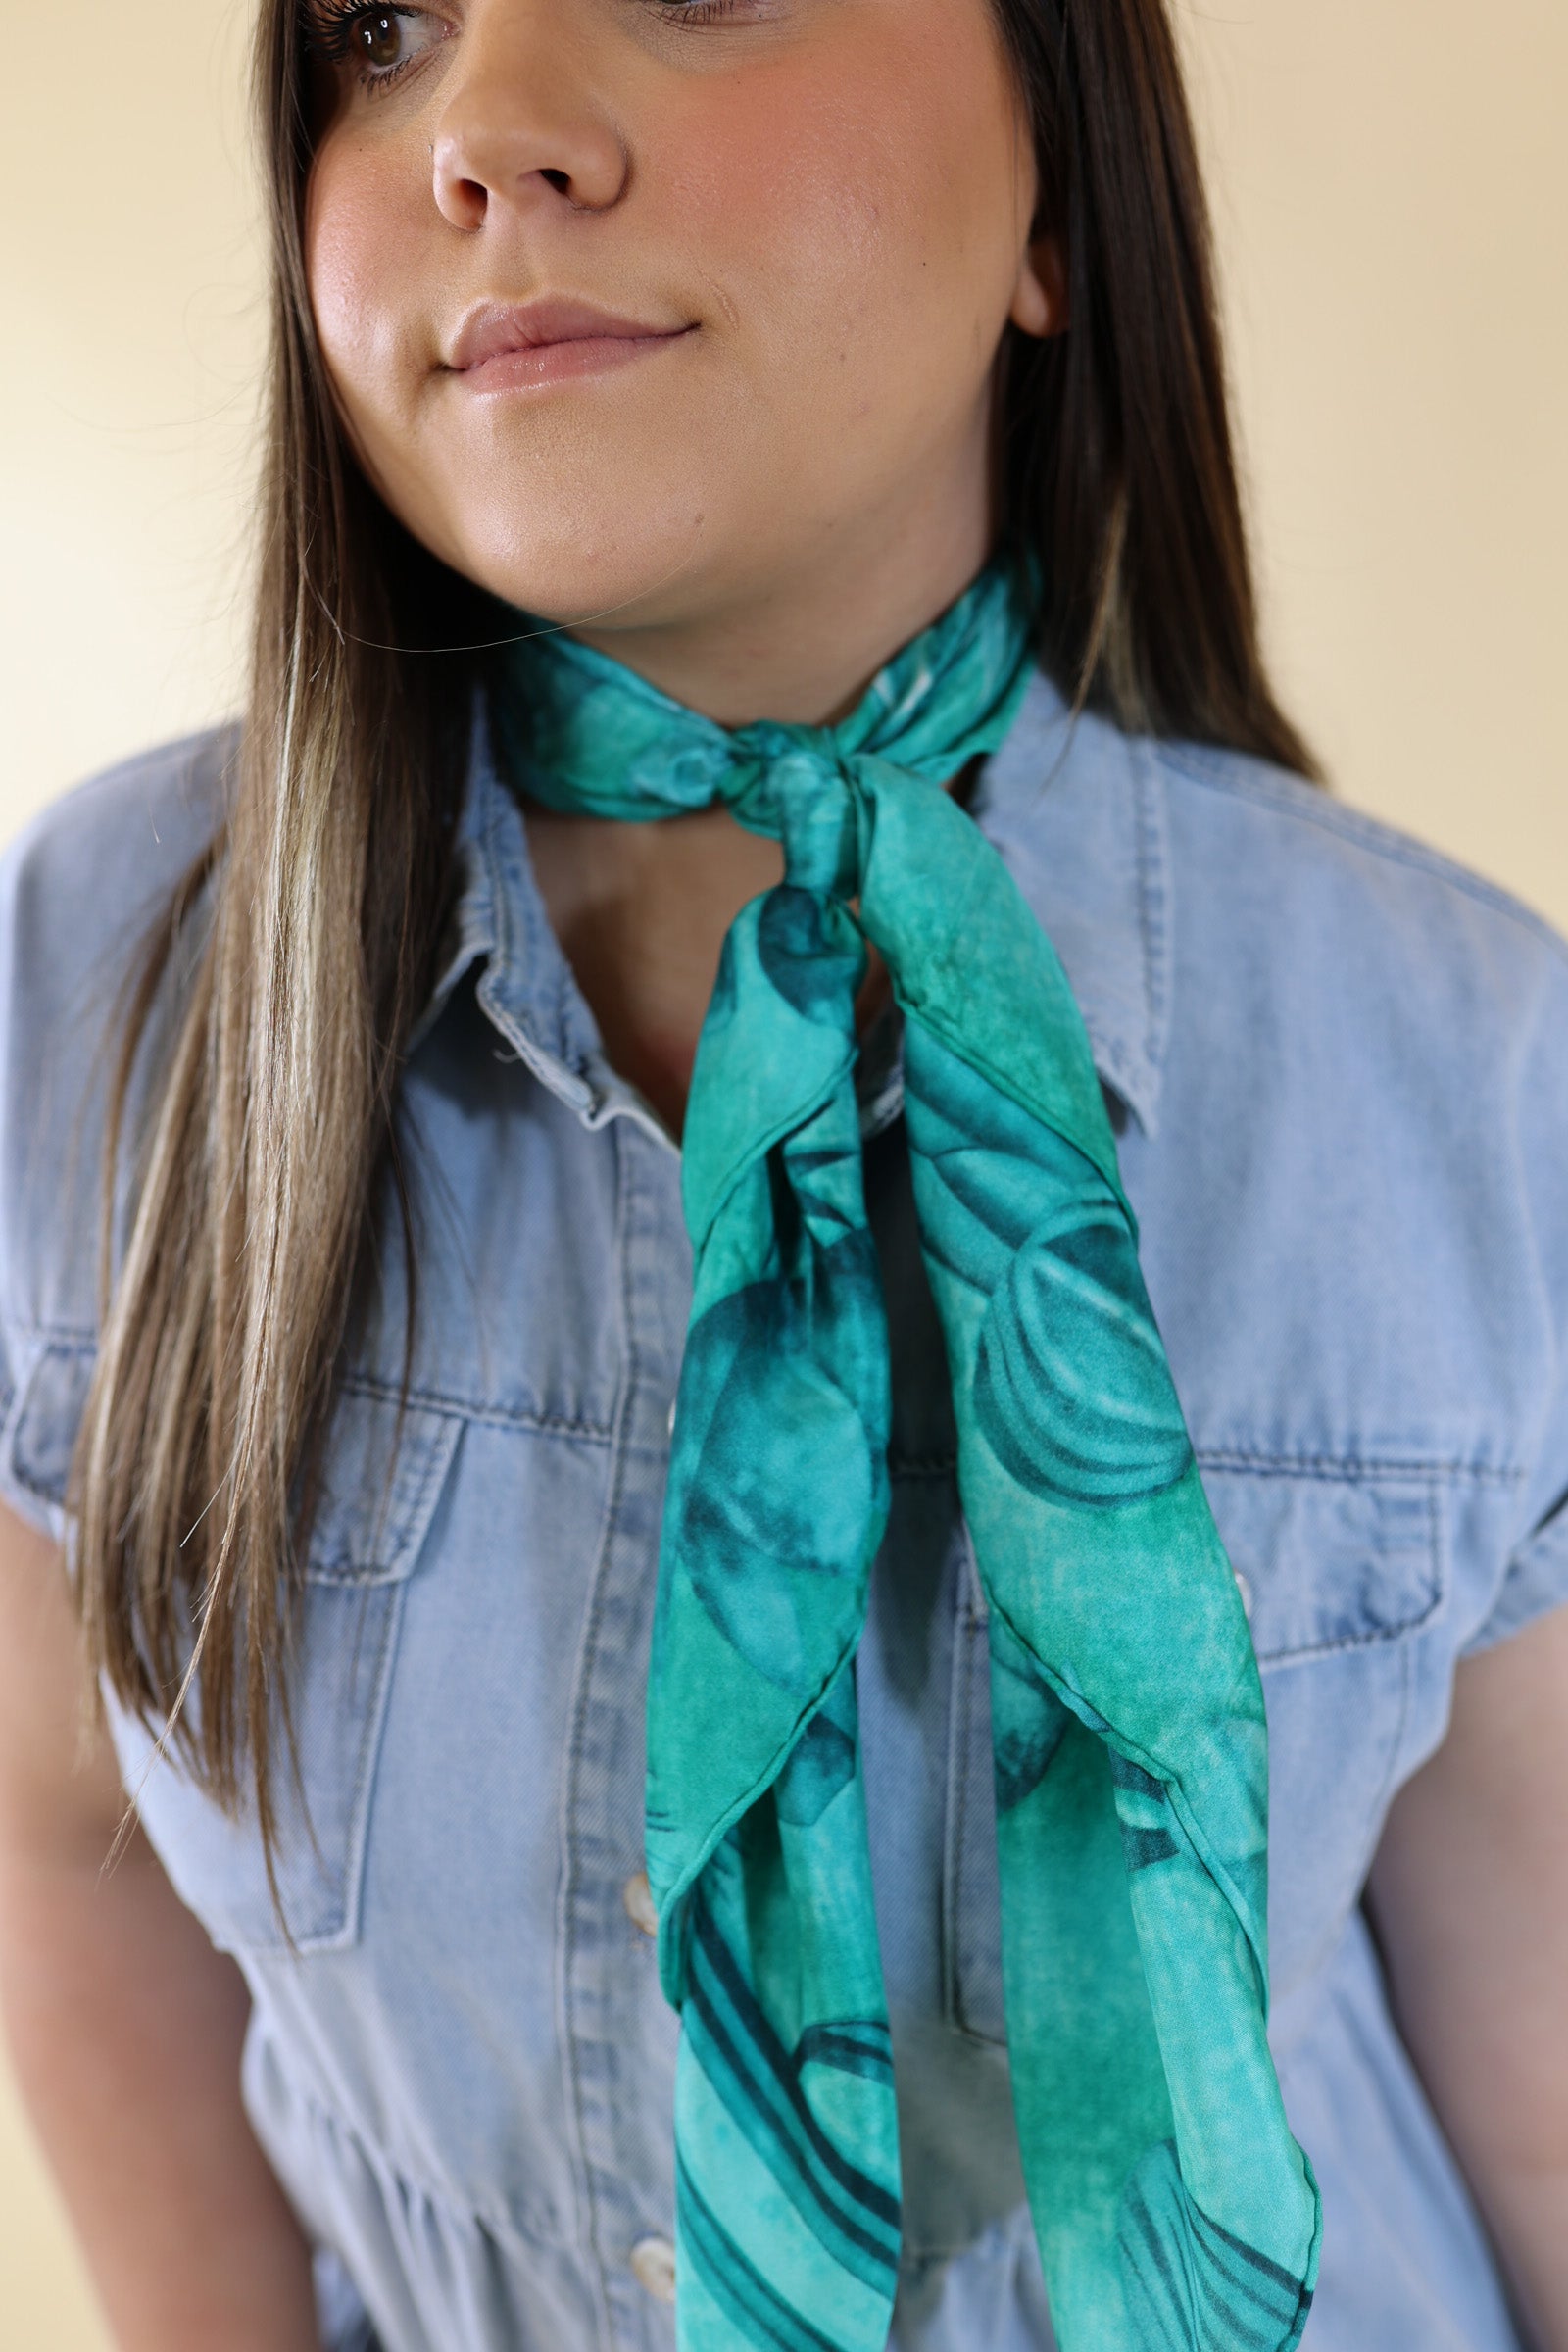 Southwest Cactus Wild Rag in Teal - Giddy Up Glamour Boutique